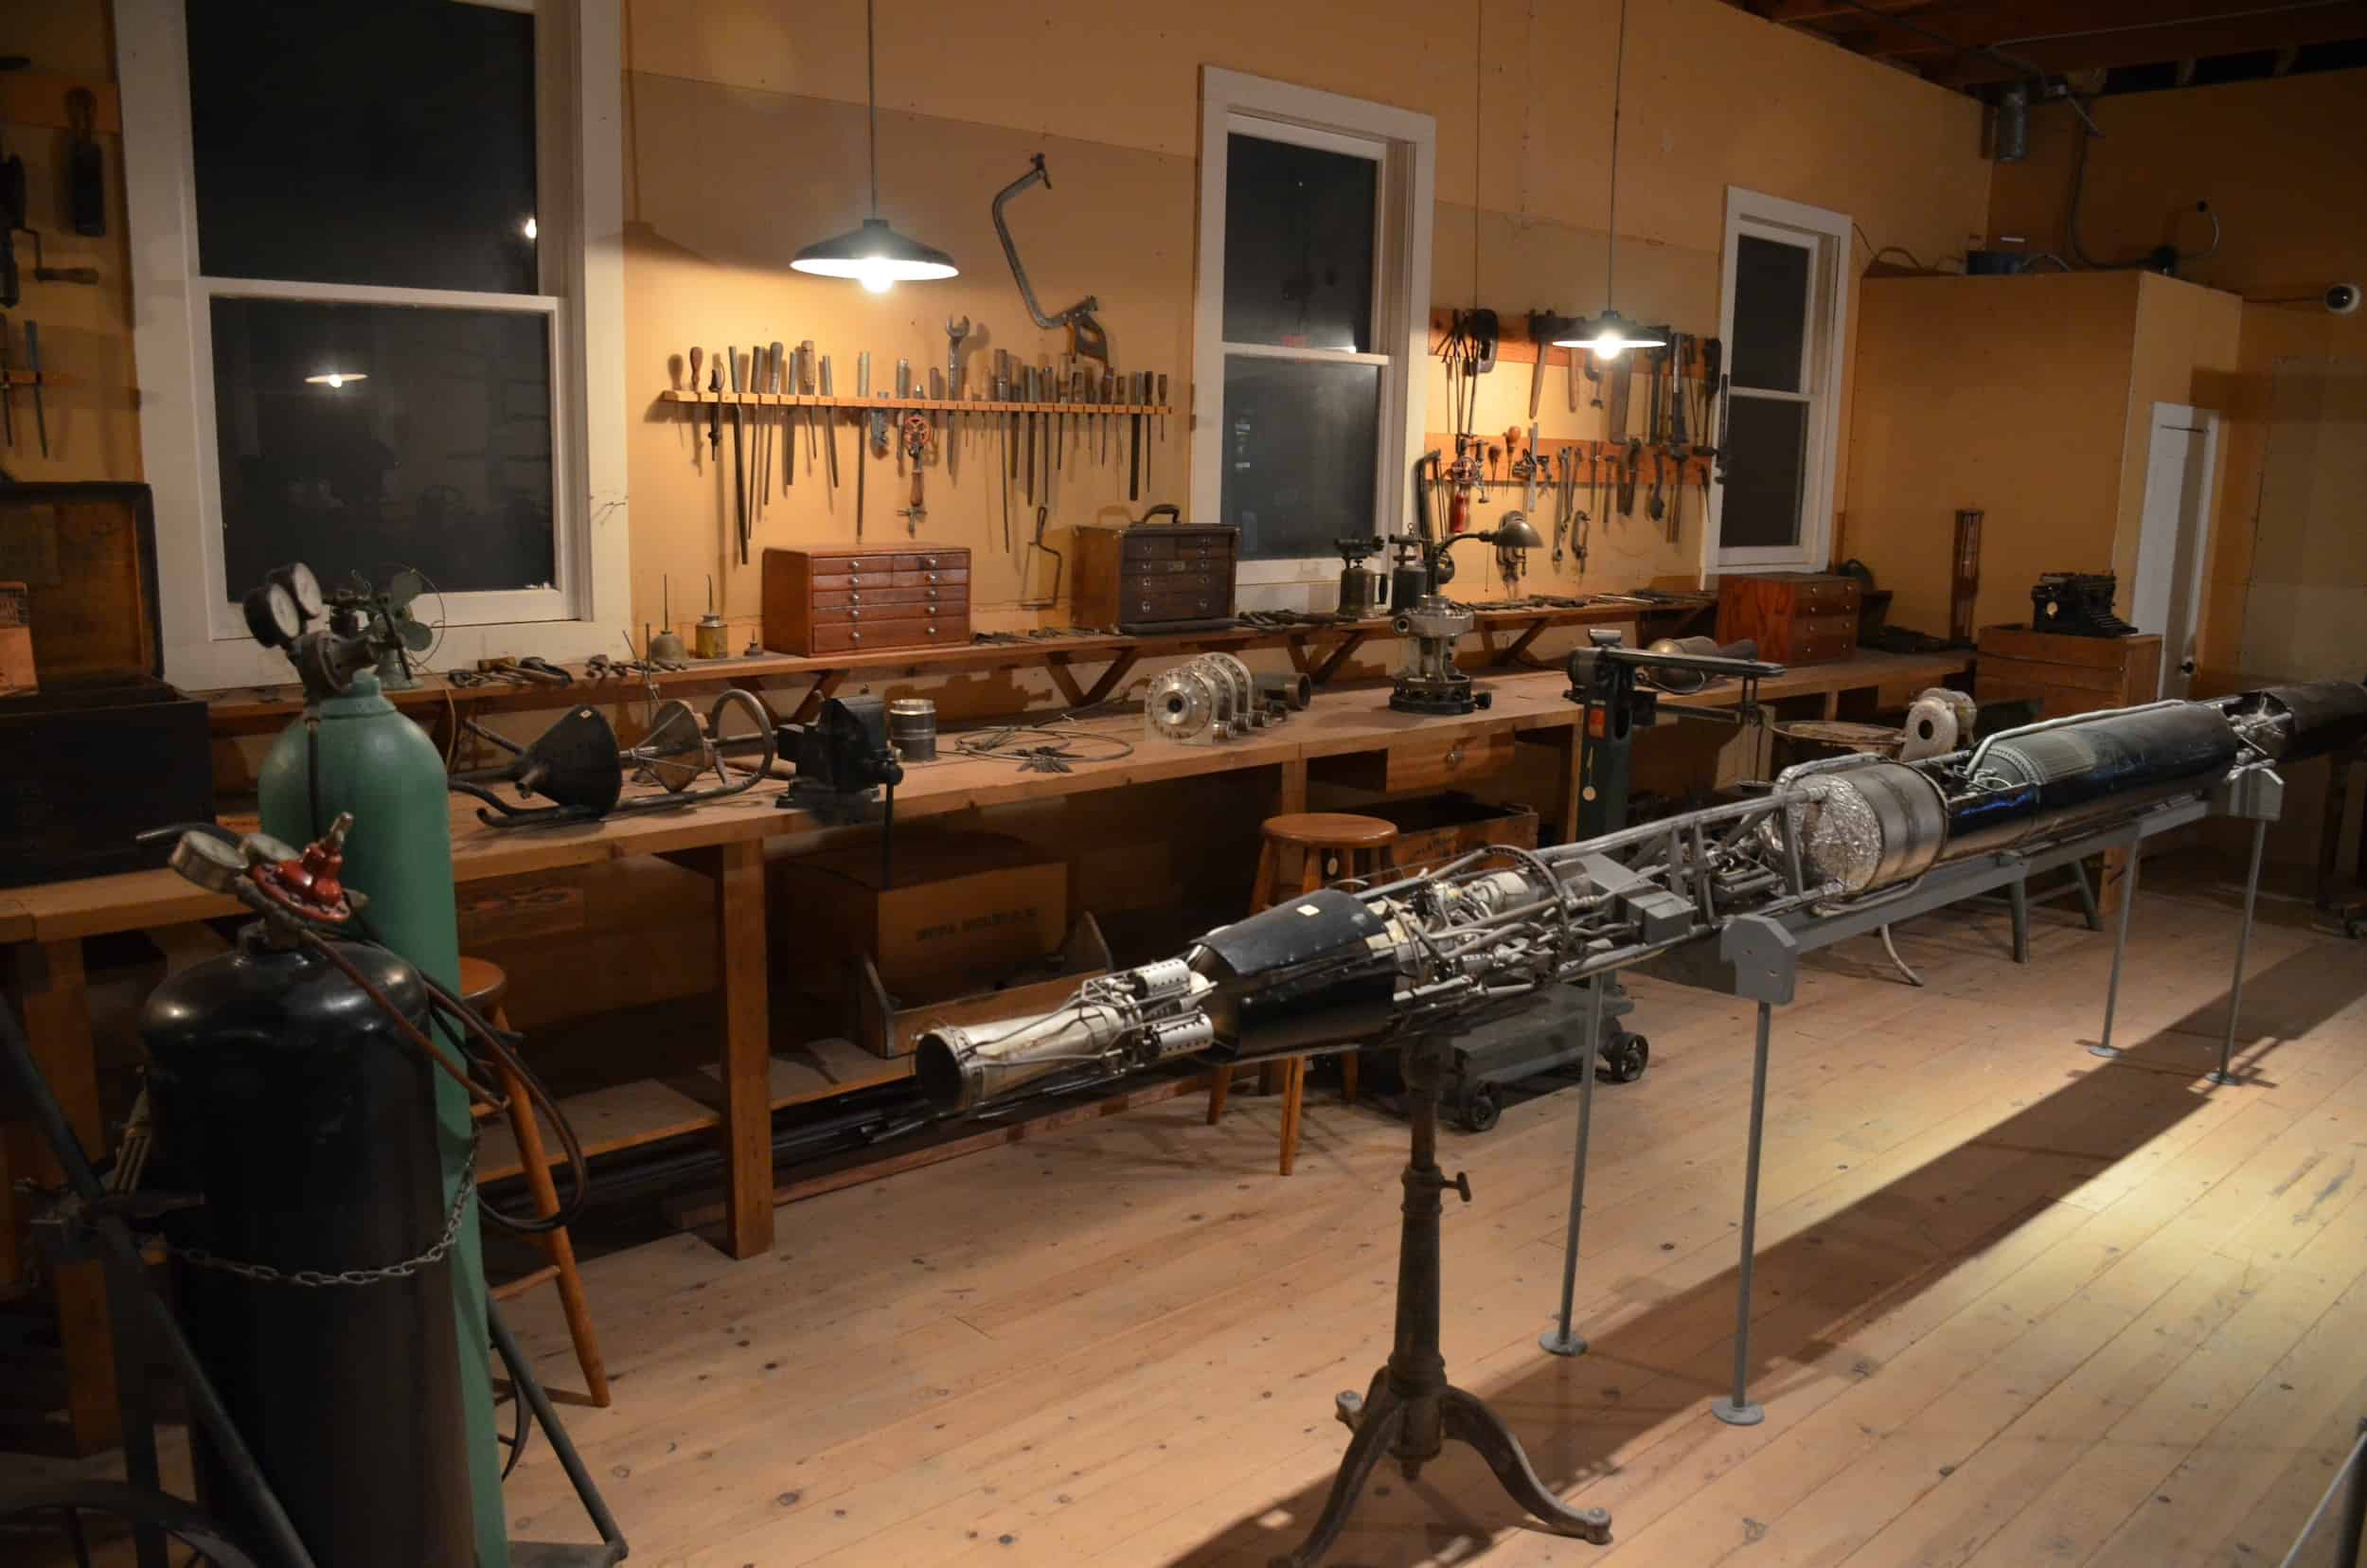 Recreation of Goddard's workshop in Robert H. Goddard: The Father of Modern Rocketry at the Roswell Museum and Arts Center in Roswell, New Mexico